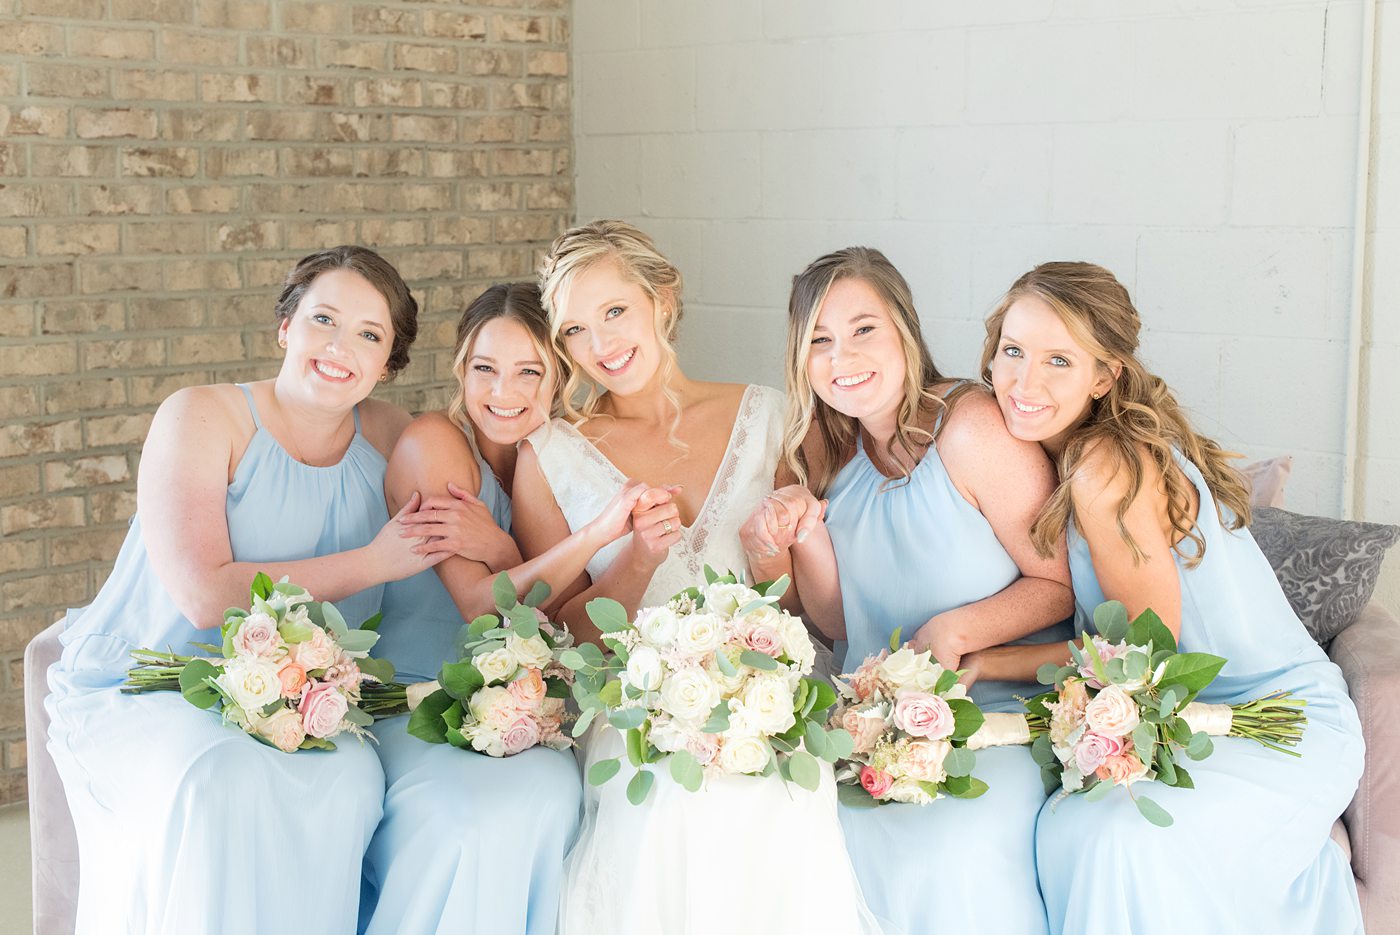 Chatham Station wedding photos my Mikkel Paige Photography from this urban chic beautiful venue in Cary, North Carolina. Picture of the bride and bridesmaids in light blue chiffon gowns. #mikkelpaige #RaleighWeddingphotographer #chathamstation #CaryNC #weddingvenues #bridestyle #bridesmaids